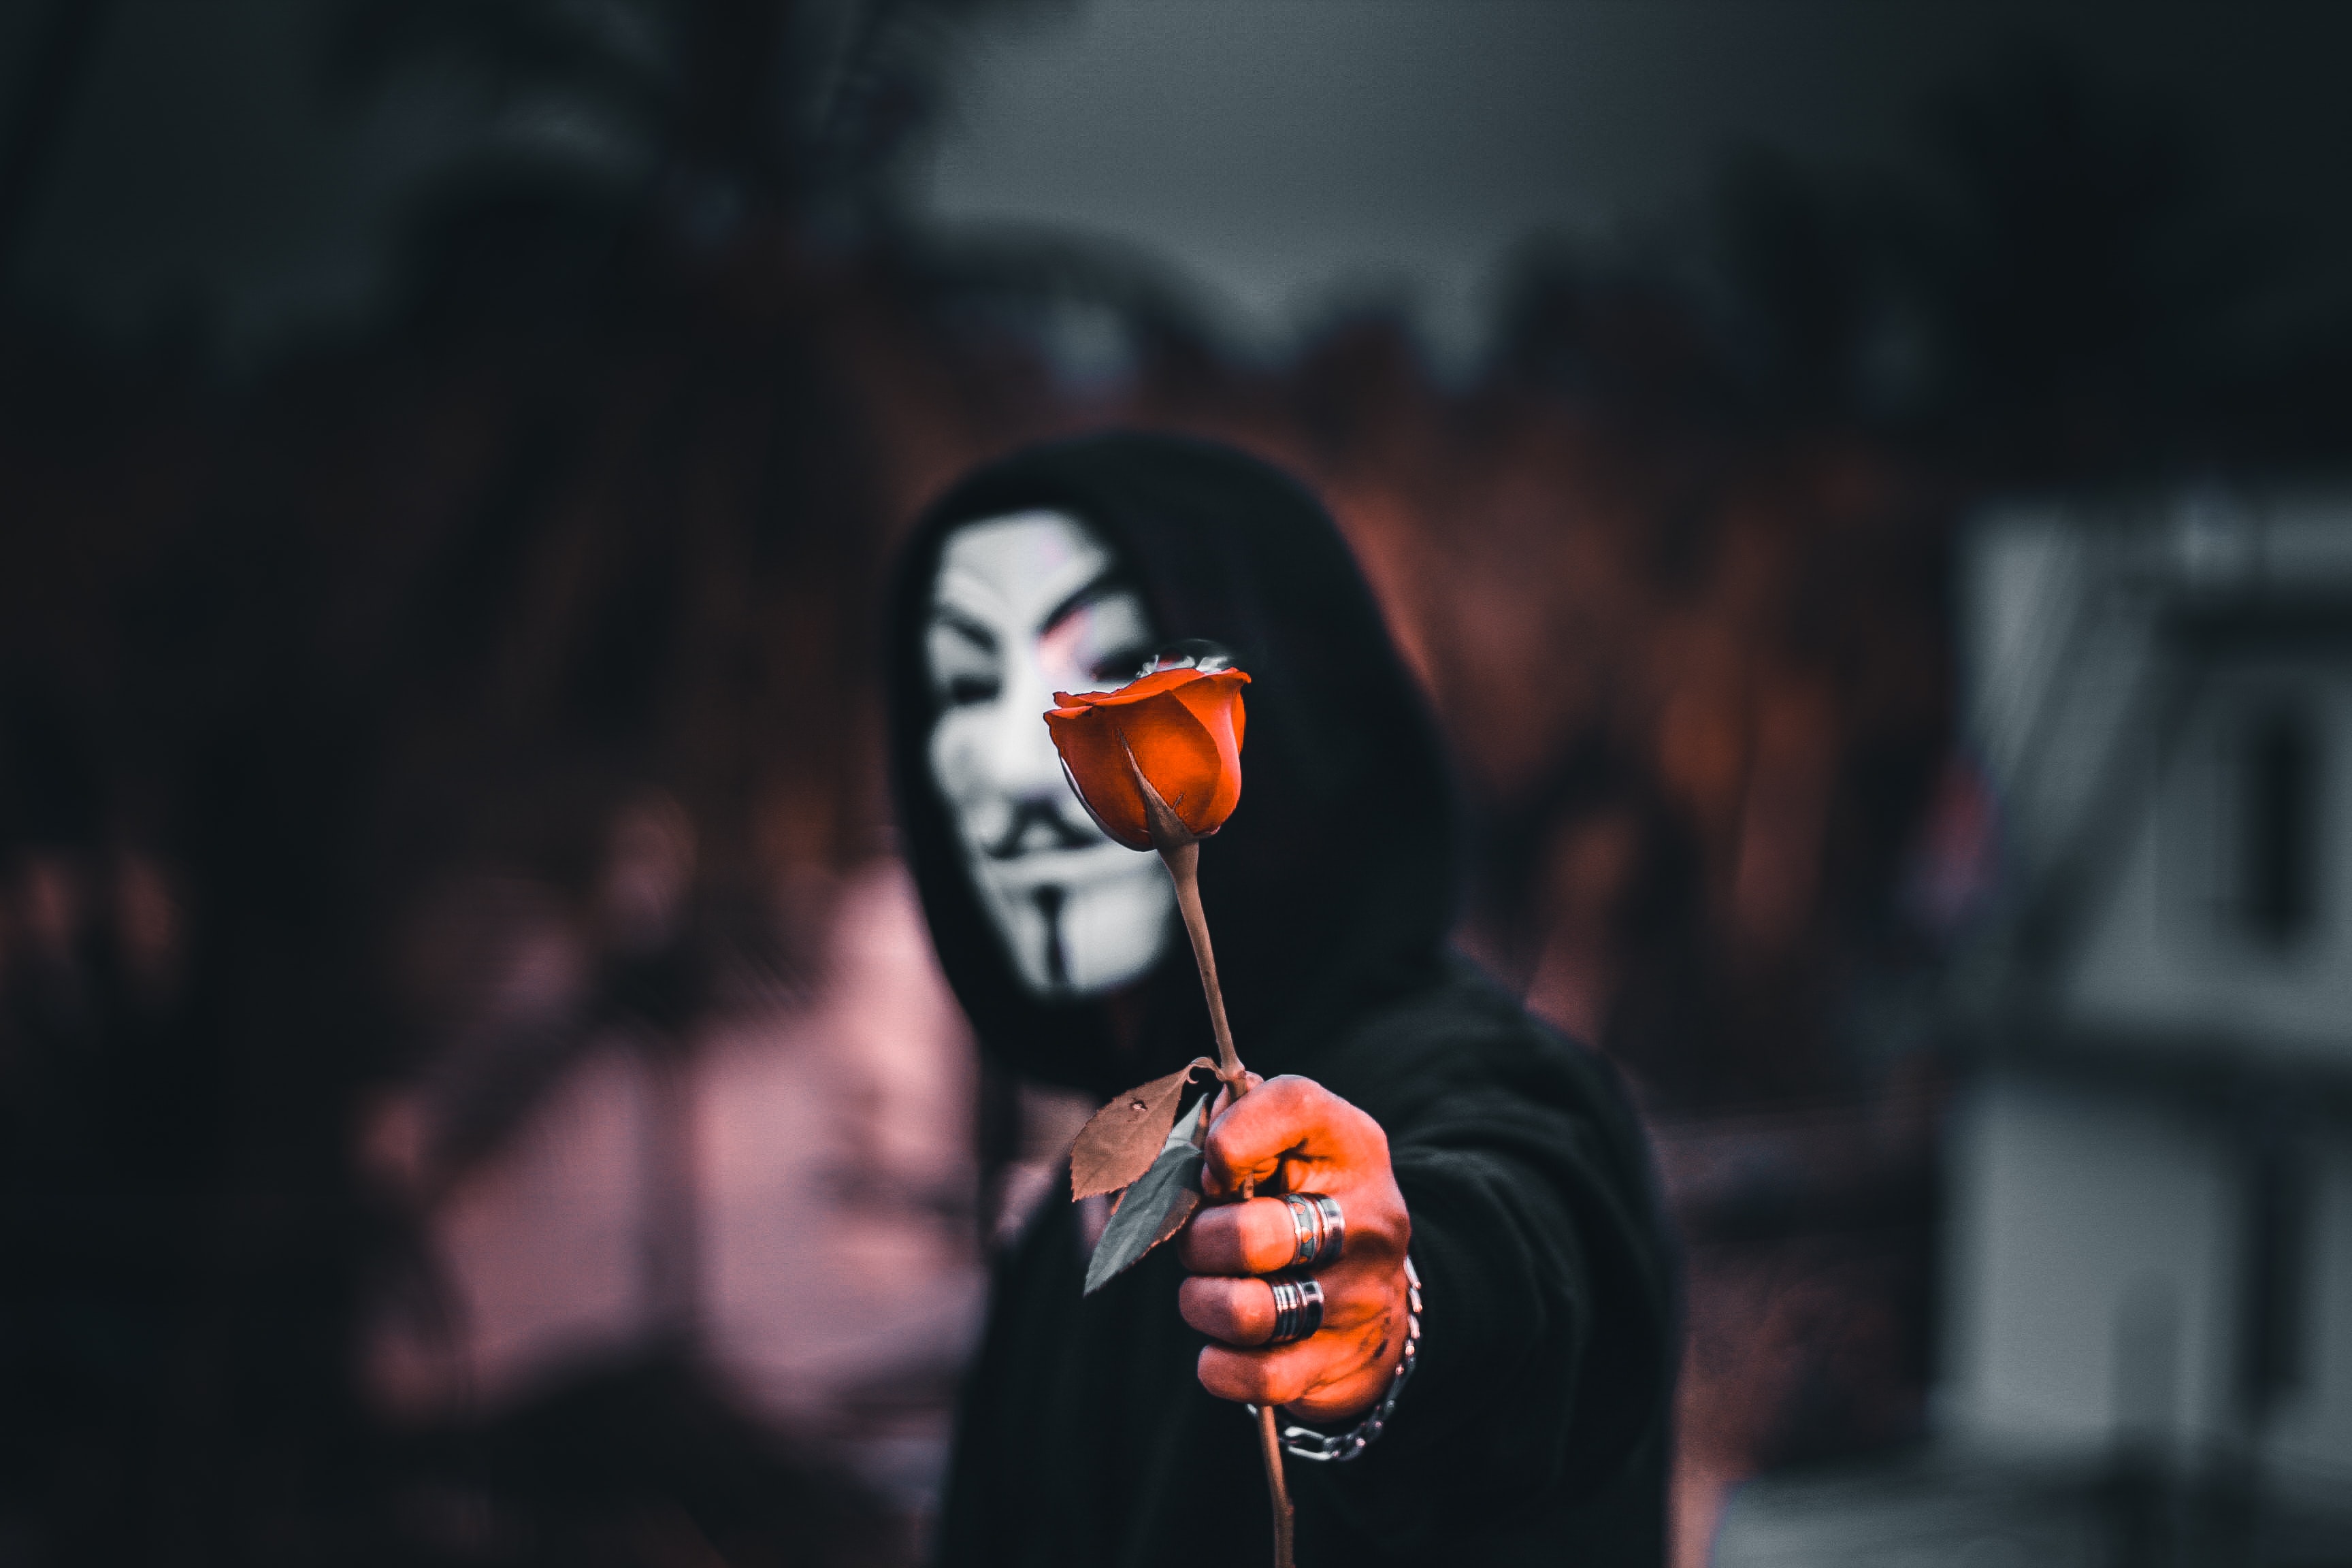 54035 download wallpaper miscellaneous, rose, anonymous, flower, miscellanea, rose flower, mask, hood screensavers and pictures for free